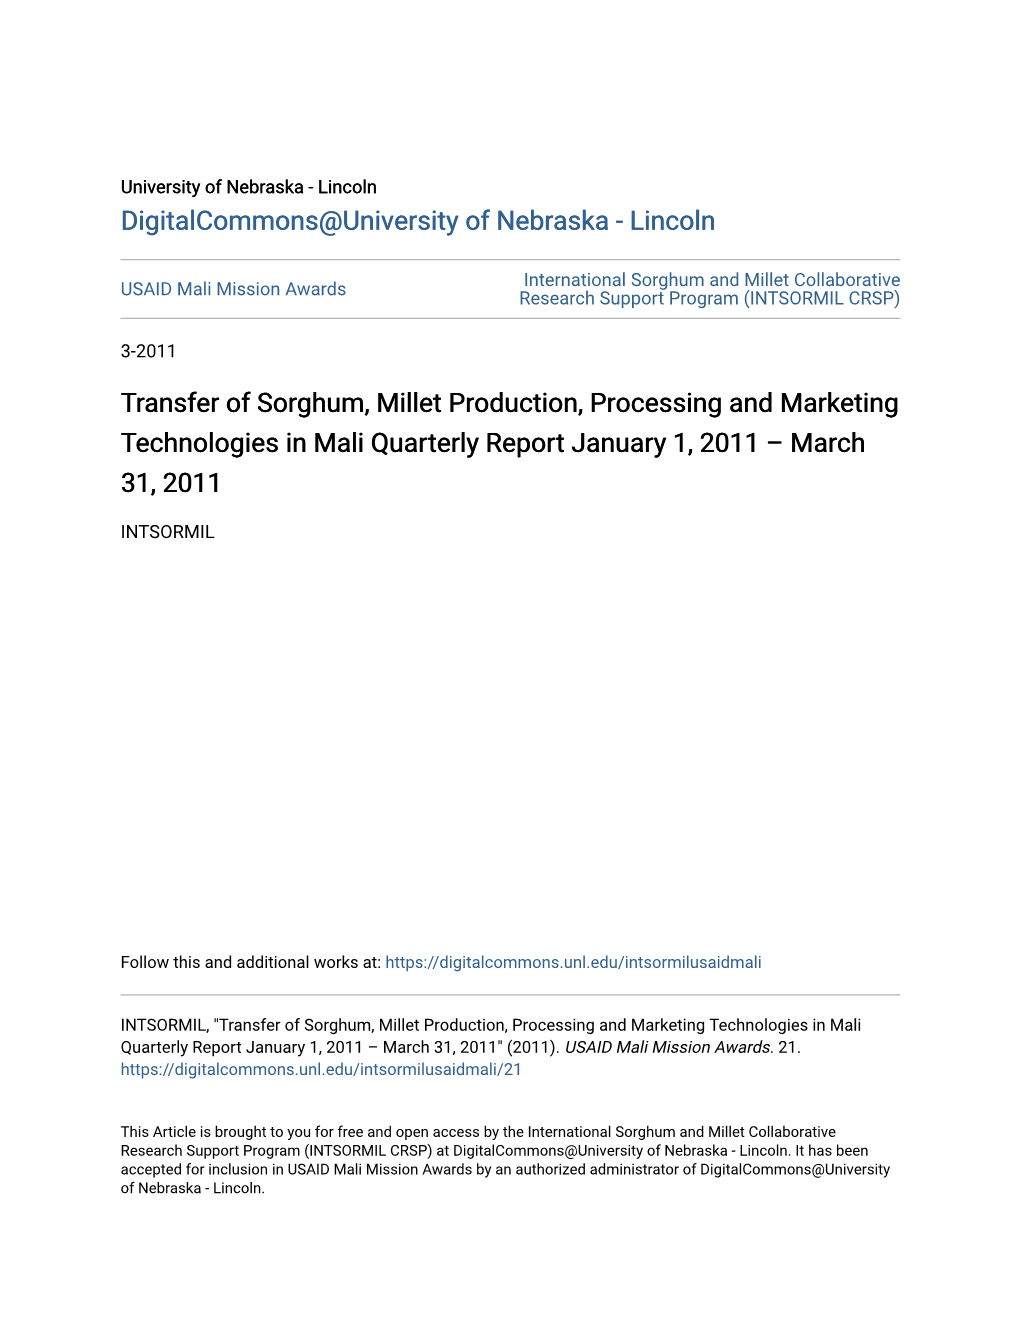 Transfer of Sorghum, Millet Production, Processing and Marketing Technologies in Mali Quarterly Report January 1, 2011 – March 31, 2011